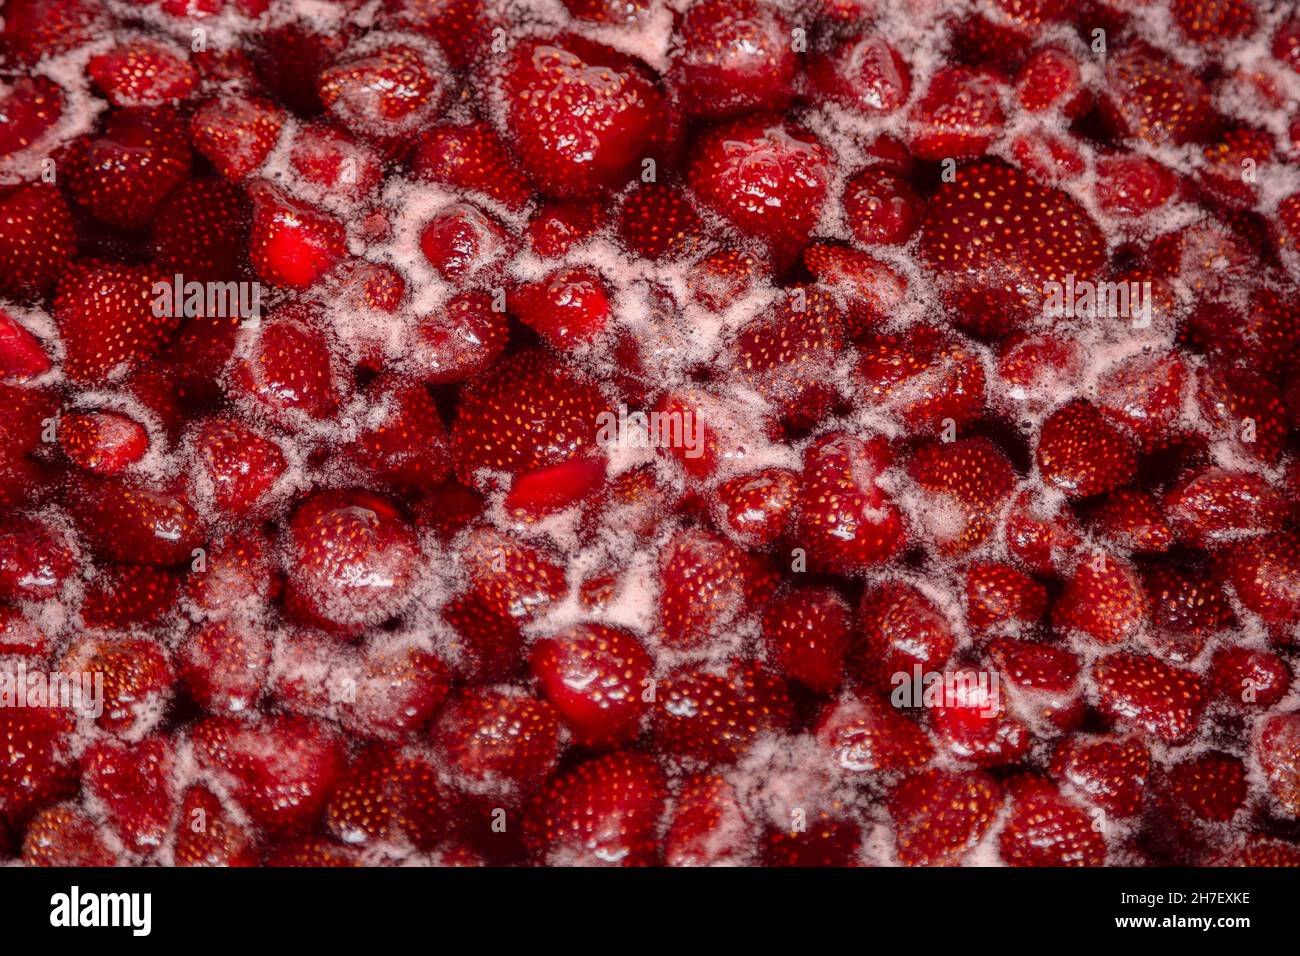 Process of making homemade strawberry jam. Red sweet syrup boiling on the stove closeup. Strawberry jam looks very appetizing. Stock Photo